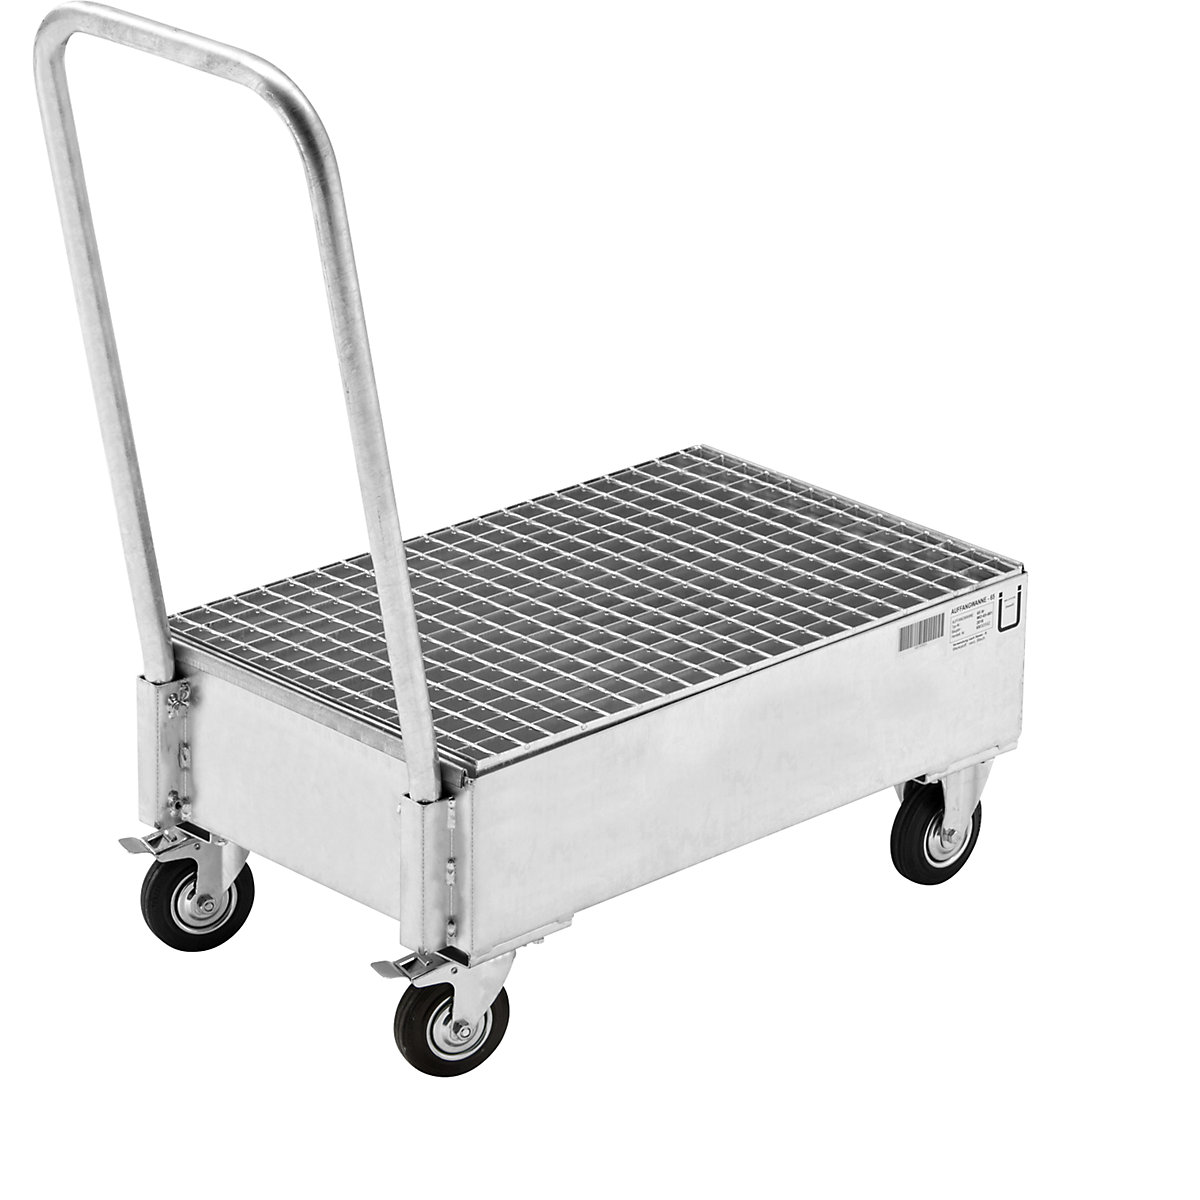 Mobile sump tray made of sheet steel – eurokraft basic, LxW 800 x 500 mm, 2 x 60 l vertical drums, hot dip galvanised-3